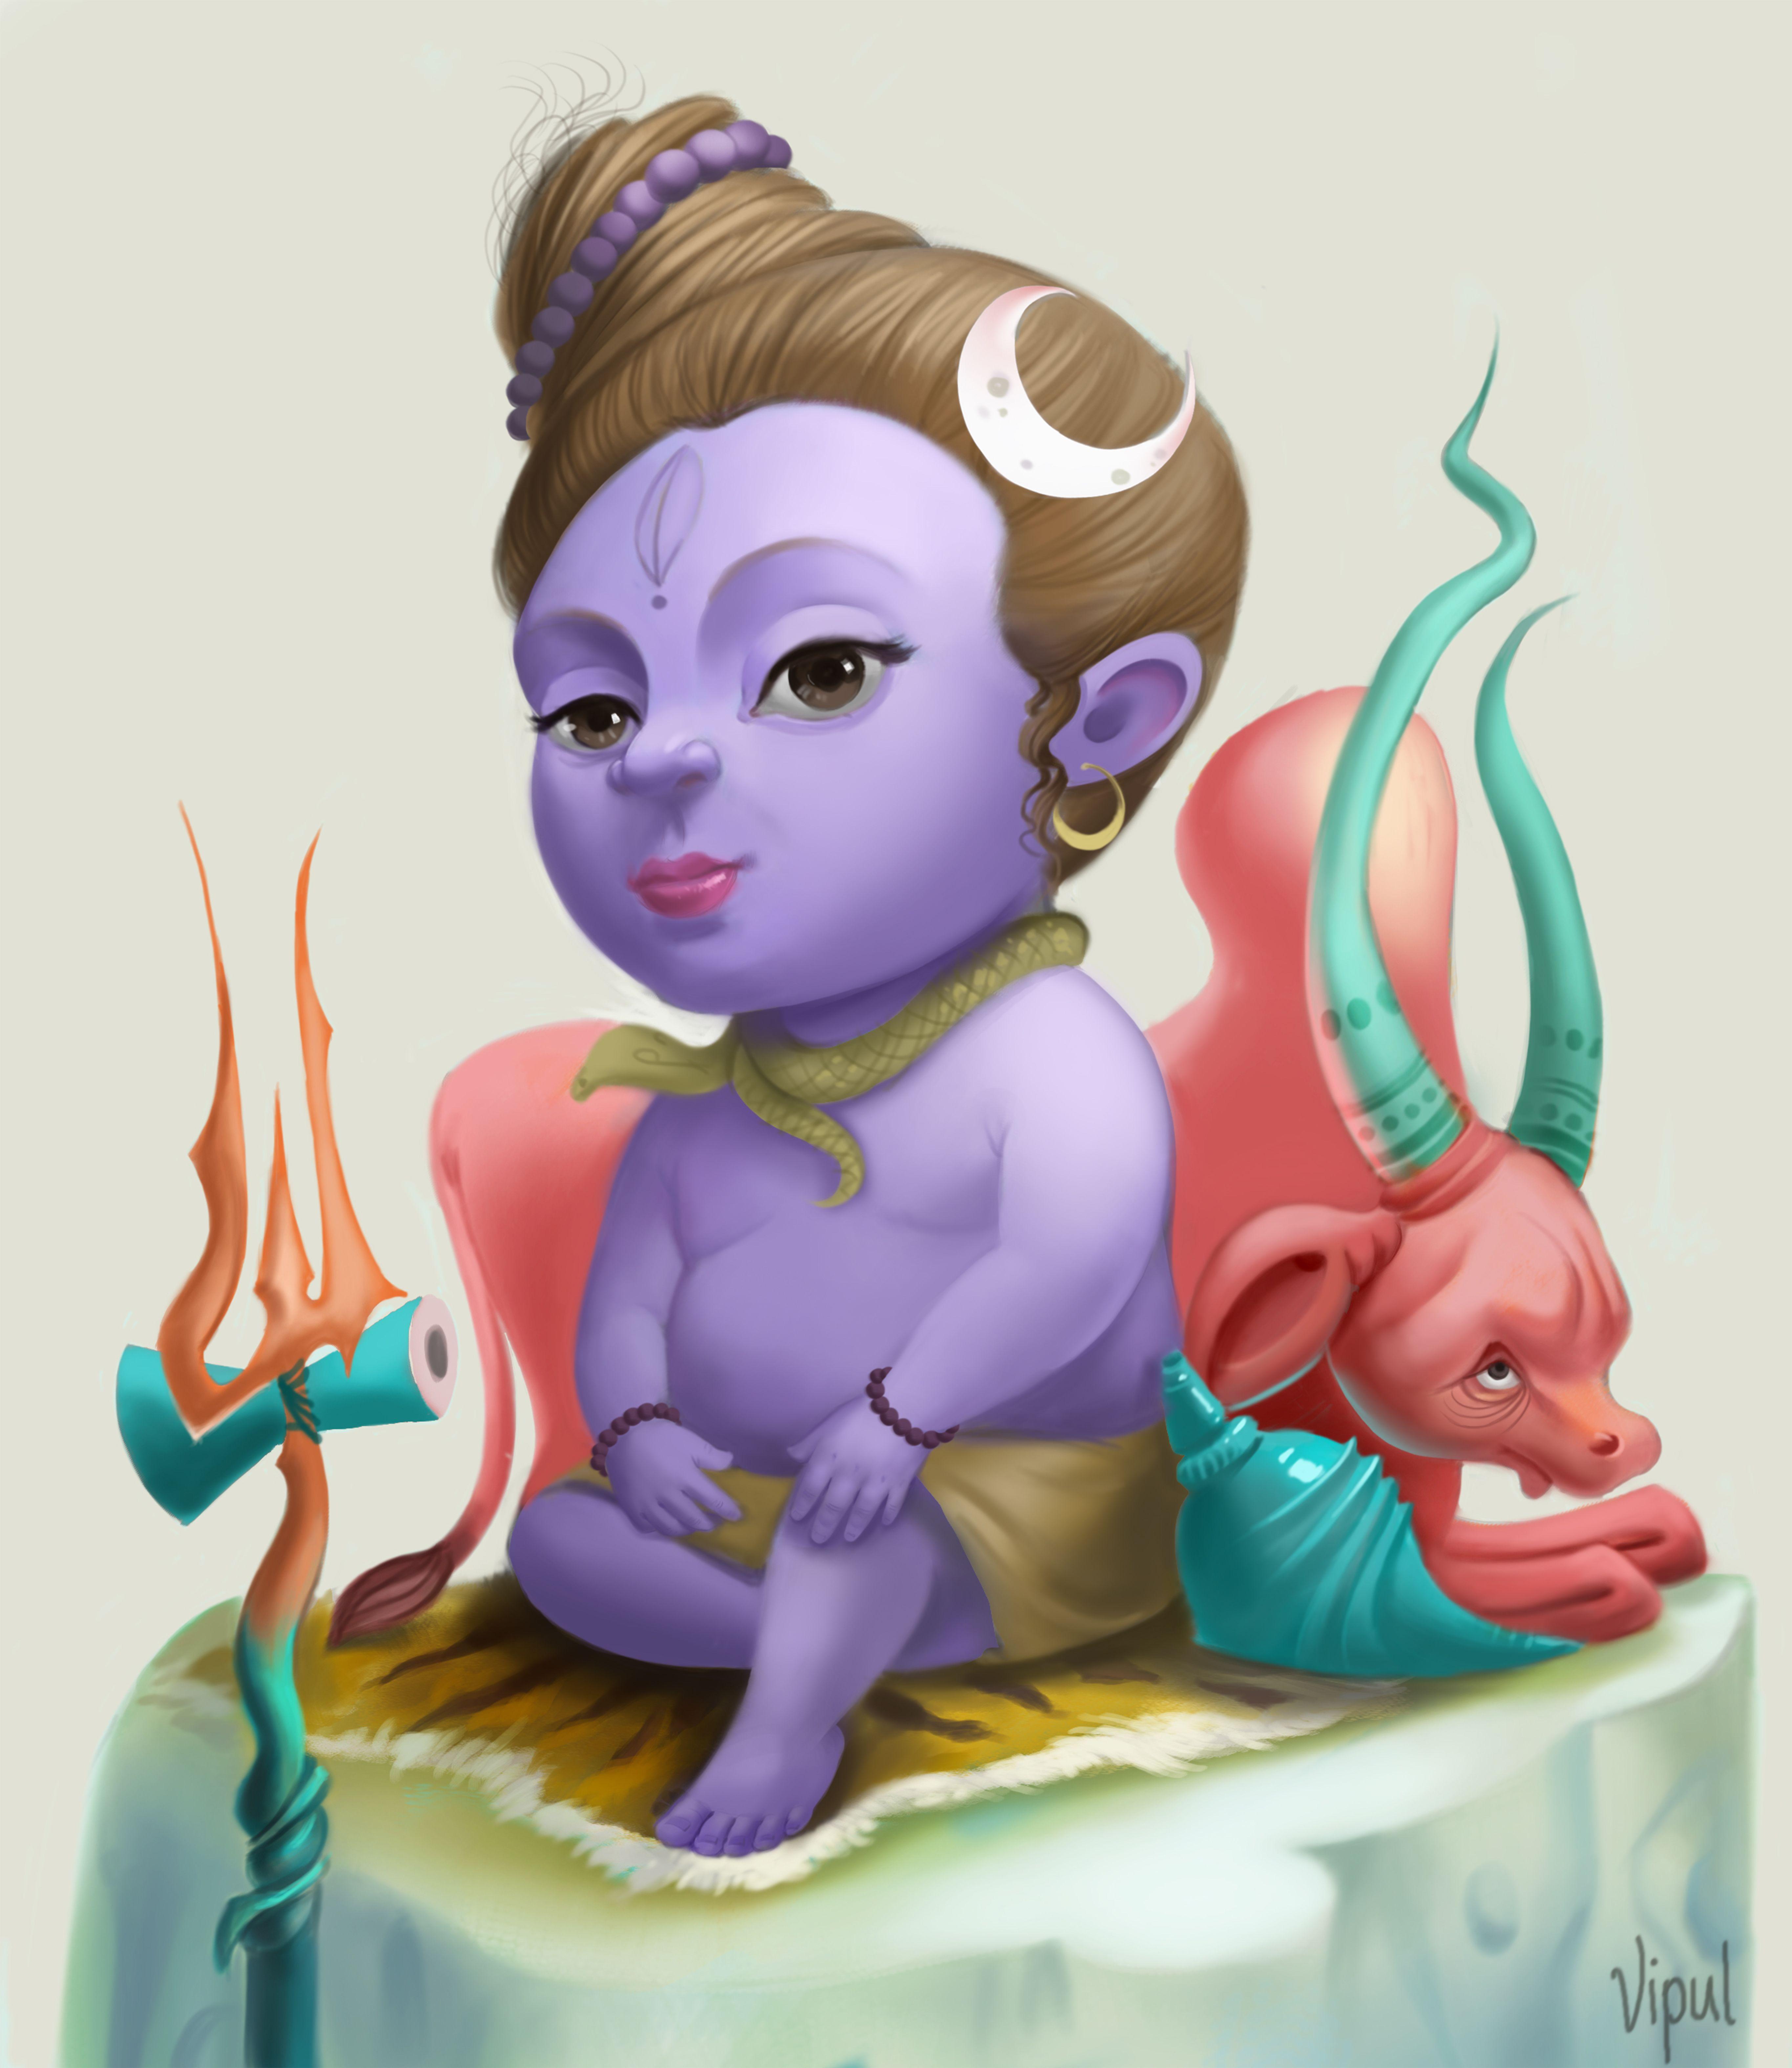 Bal Shiva art.This is a child form avatar of lord shiva